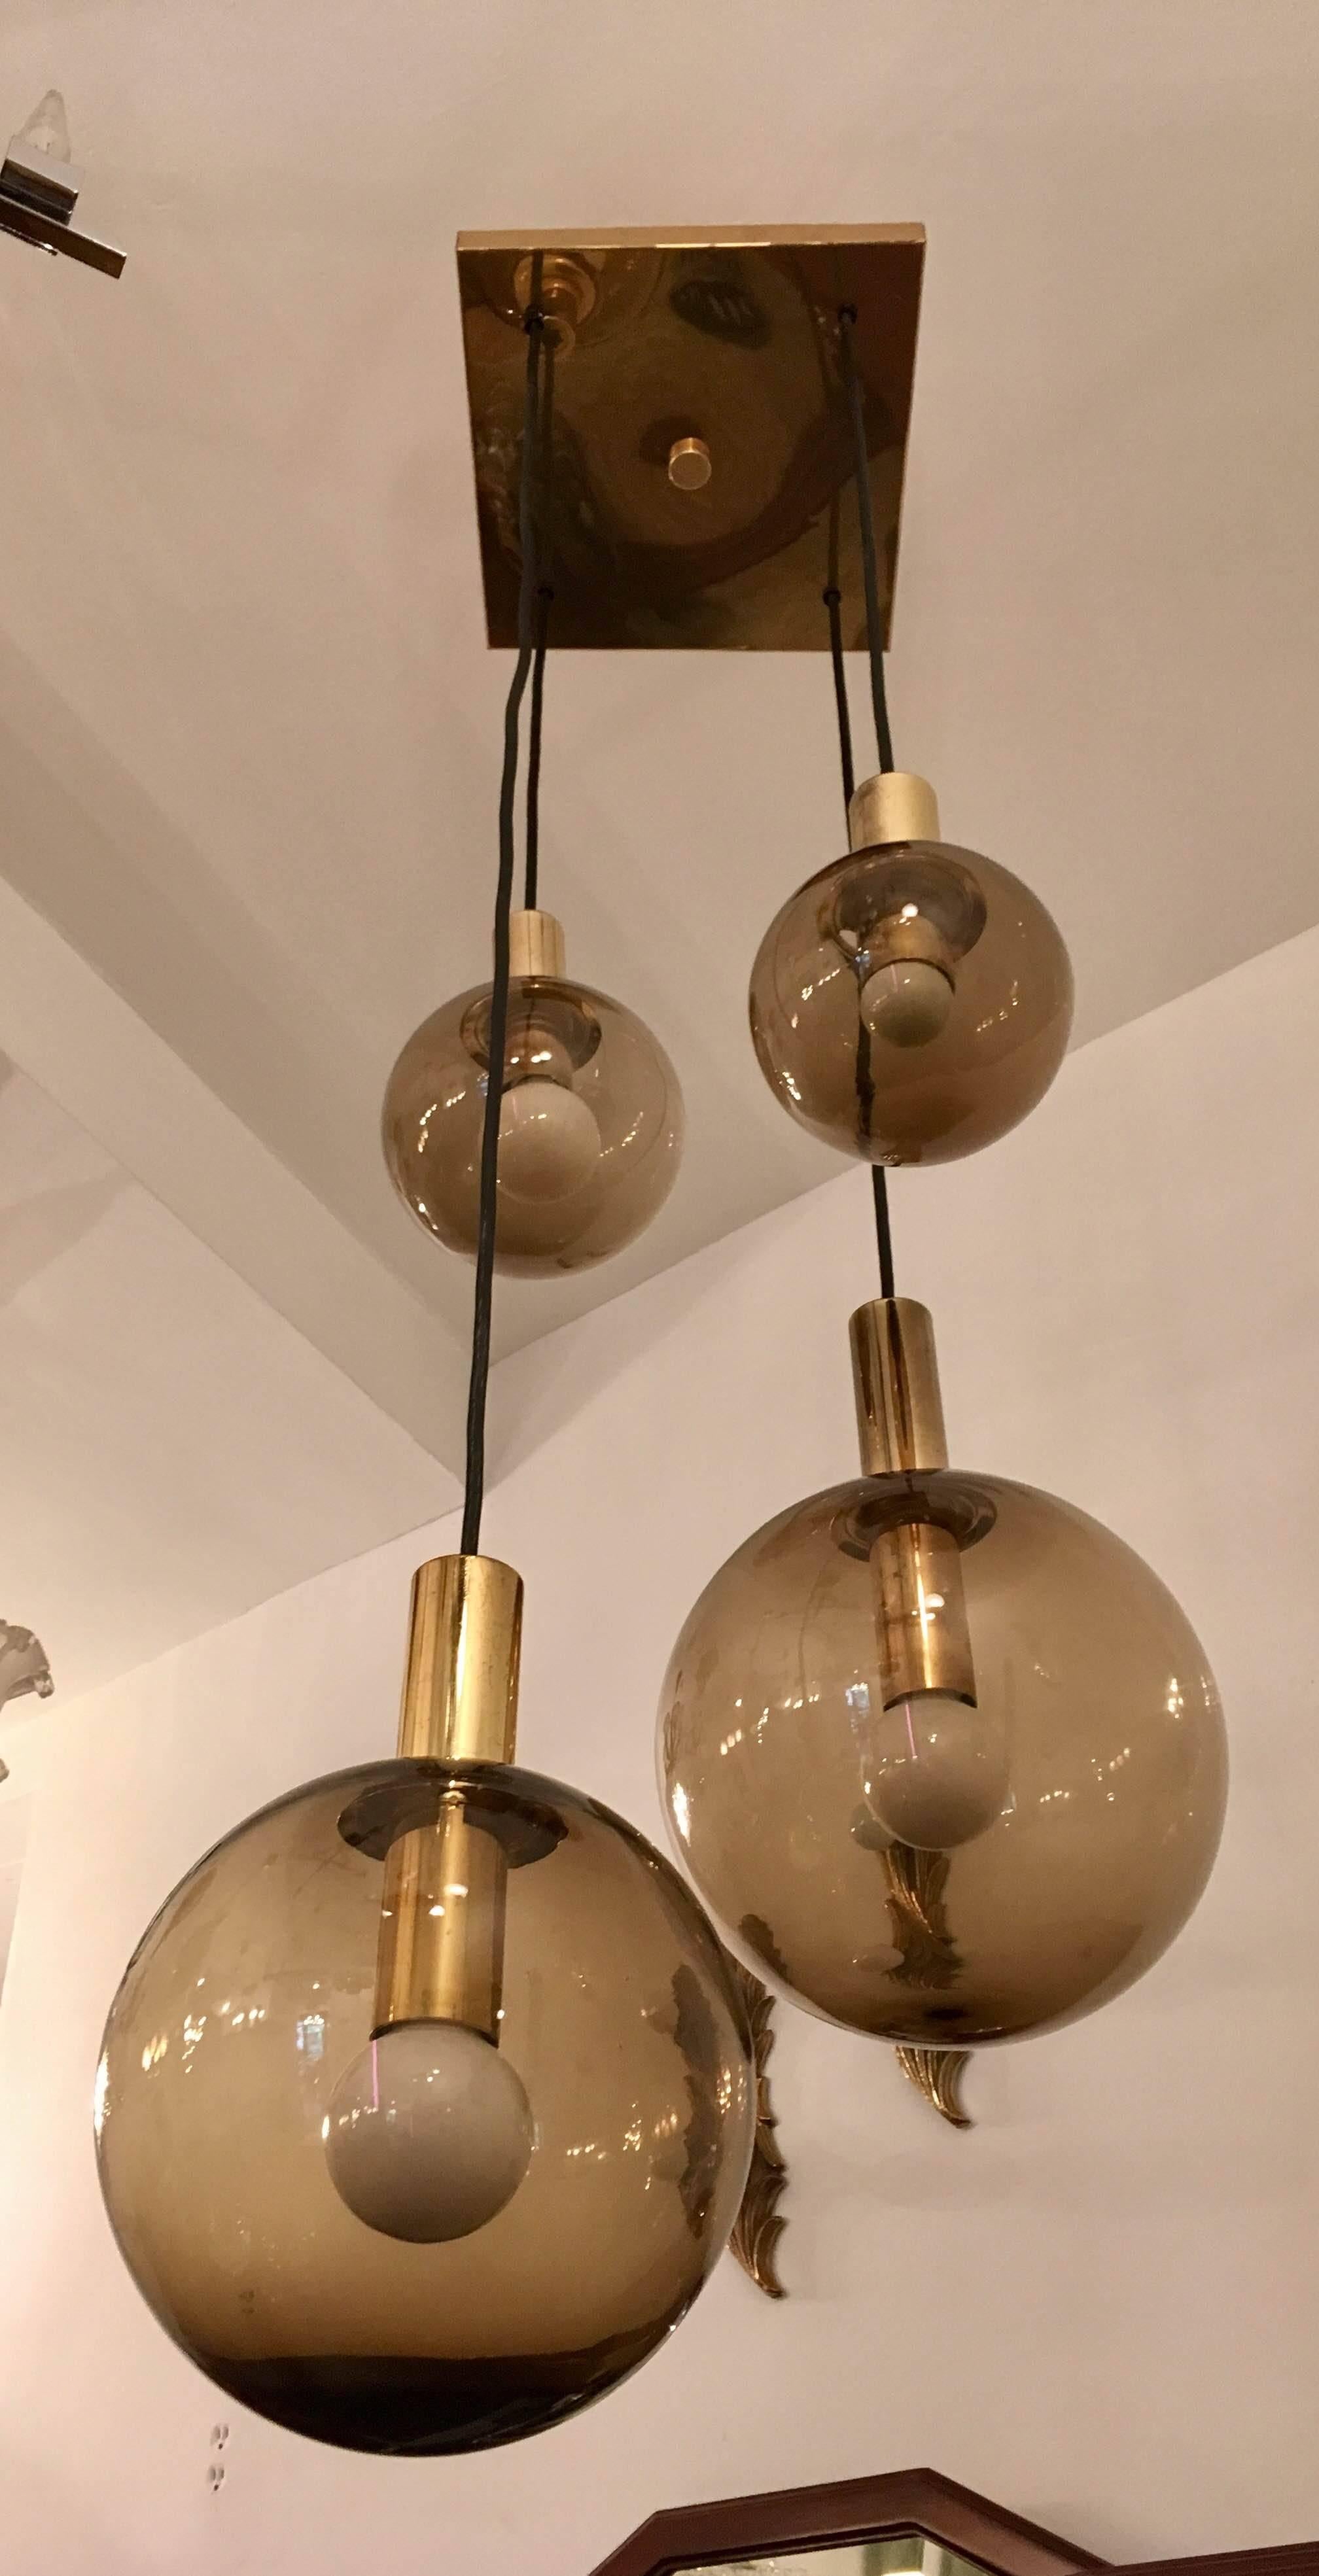 A great original 1970 high style chandelier composed of a square polished brass fixture and four smoked glass globe shades. Made by RAAK.